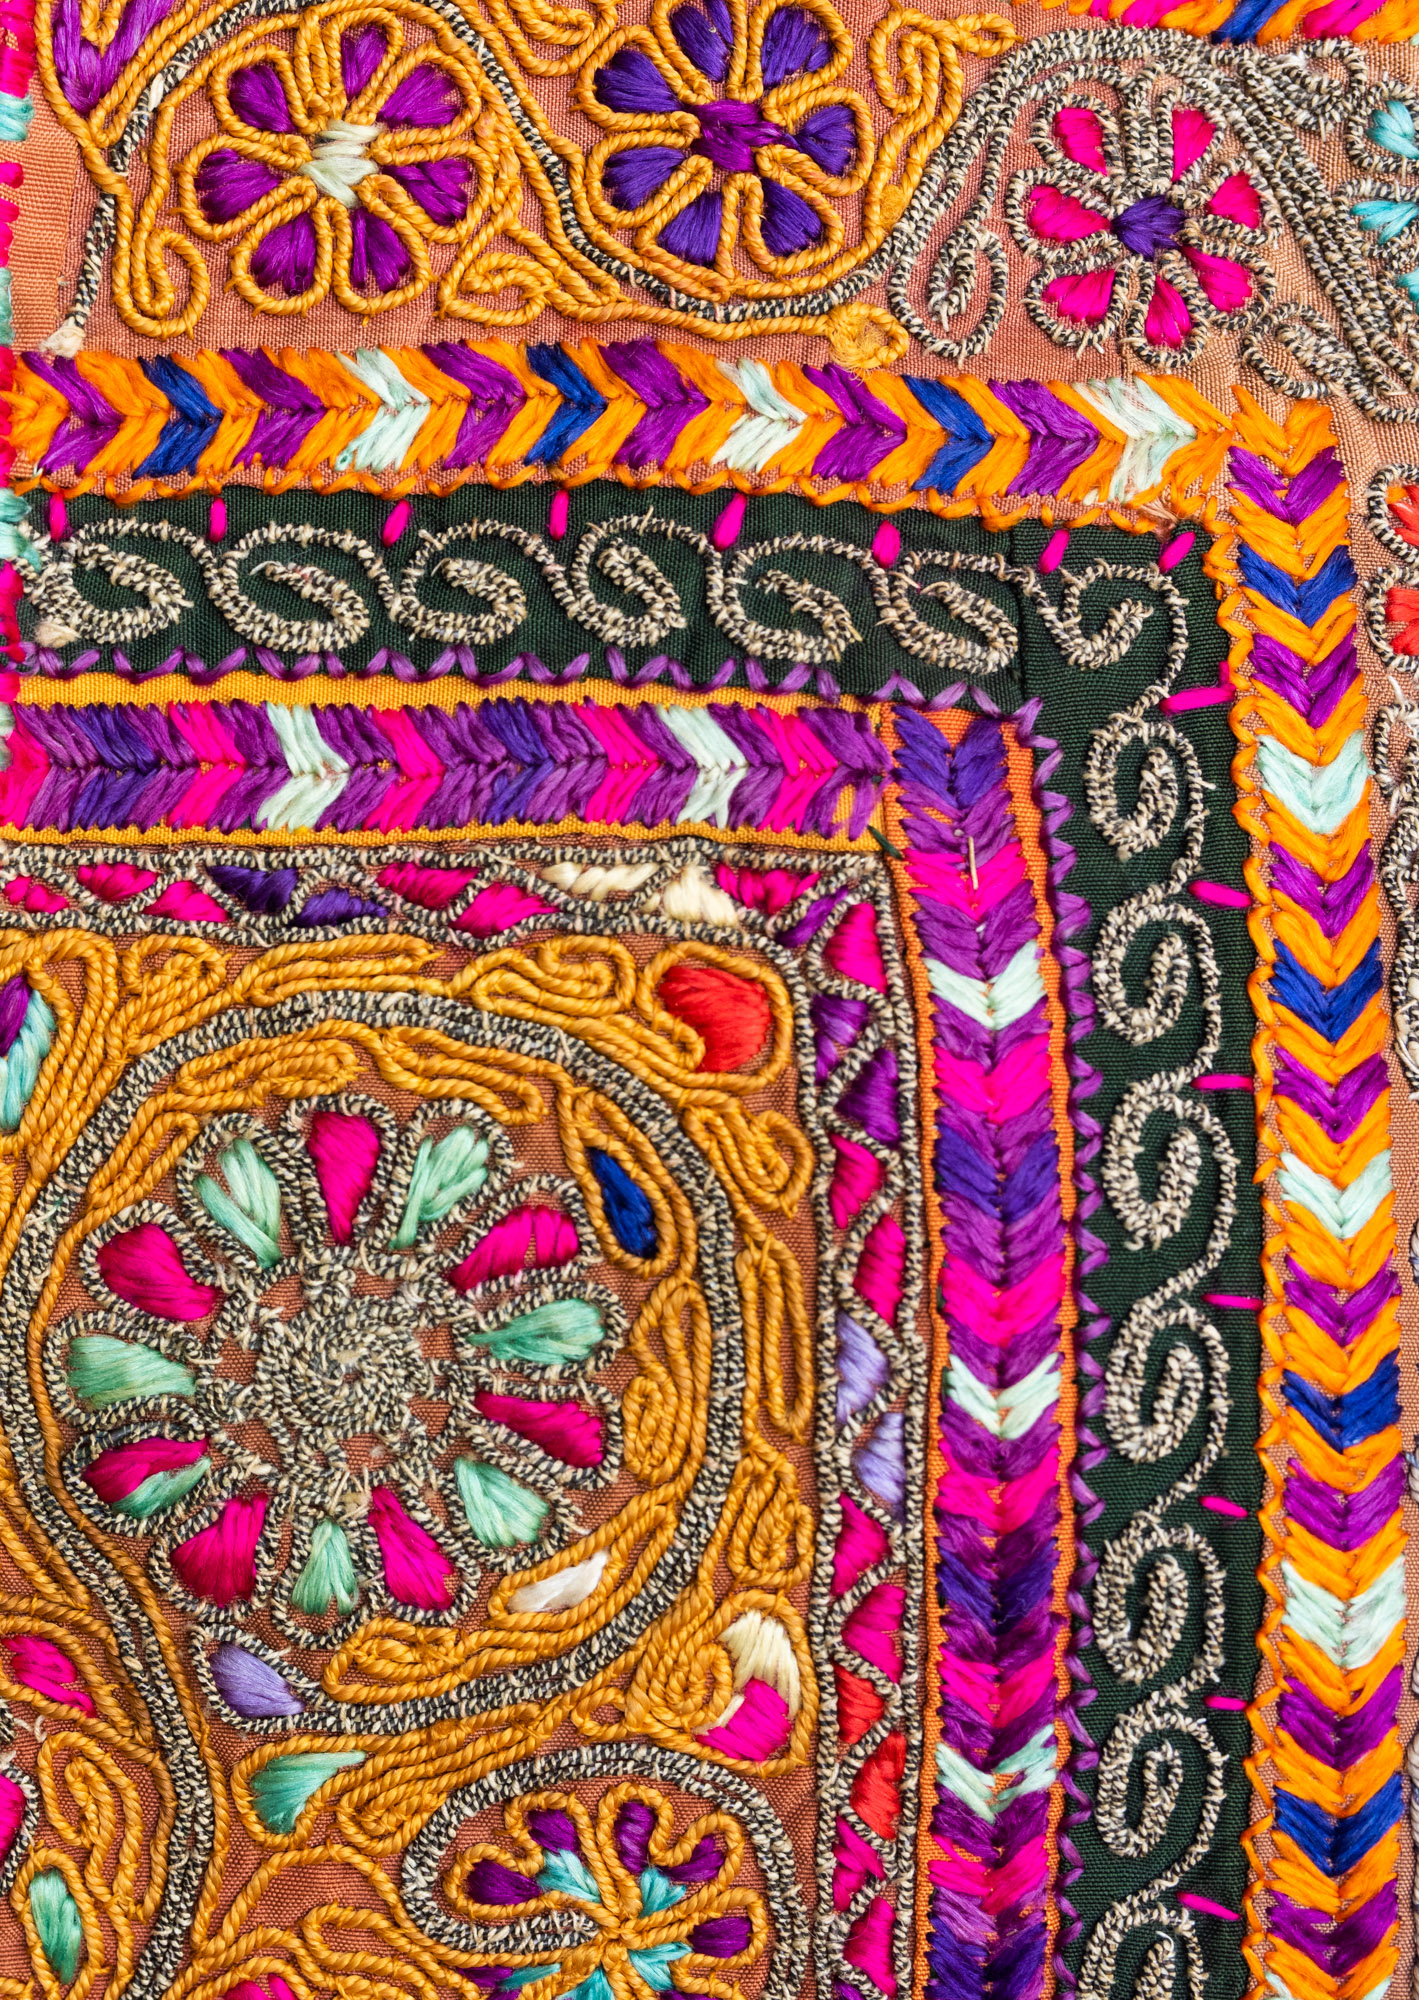 Material Power: Palestinian Embroidery - Manchester City of Literature